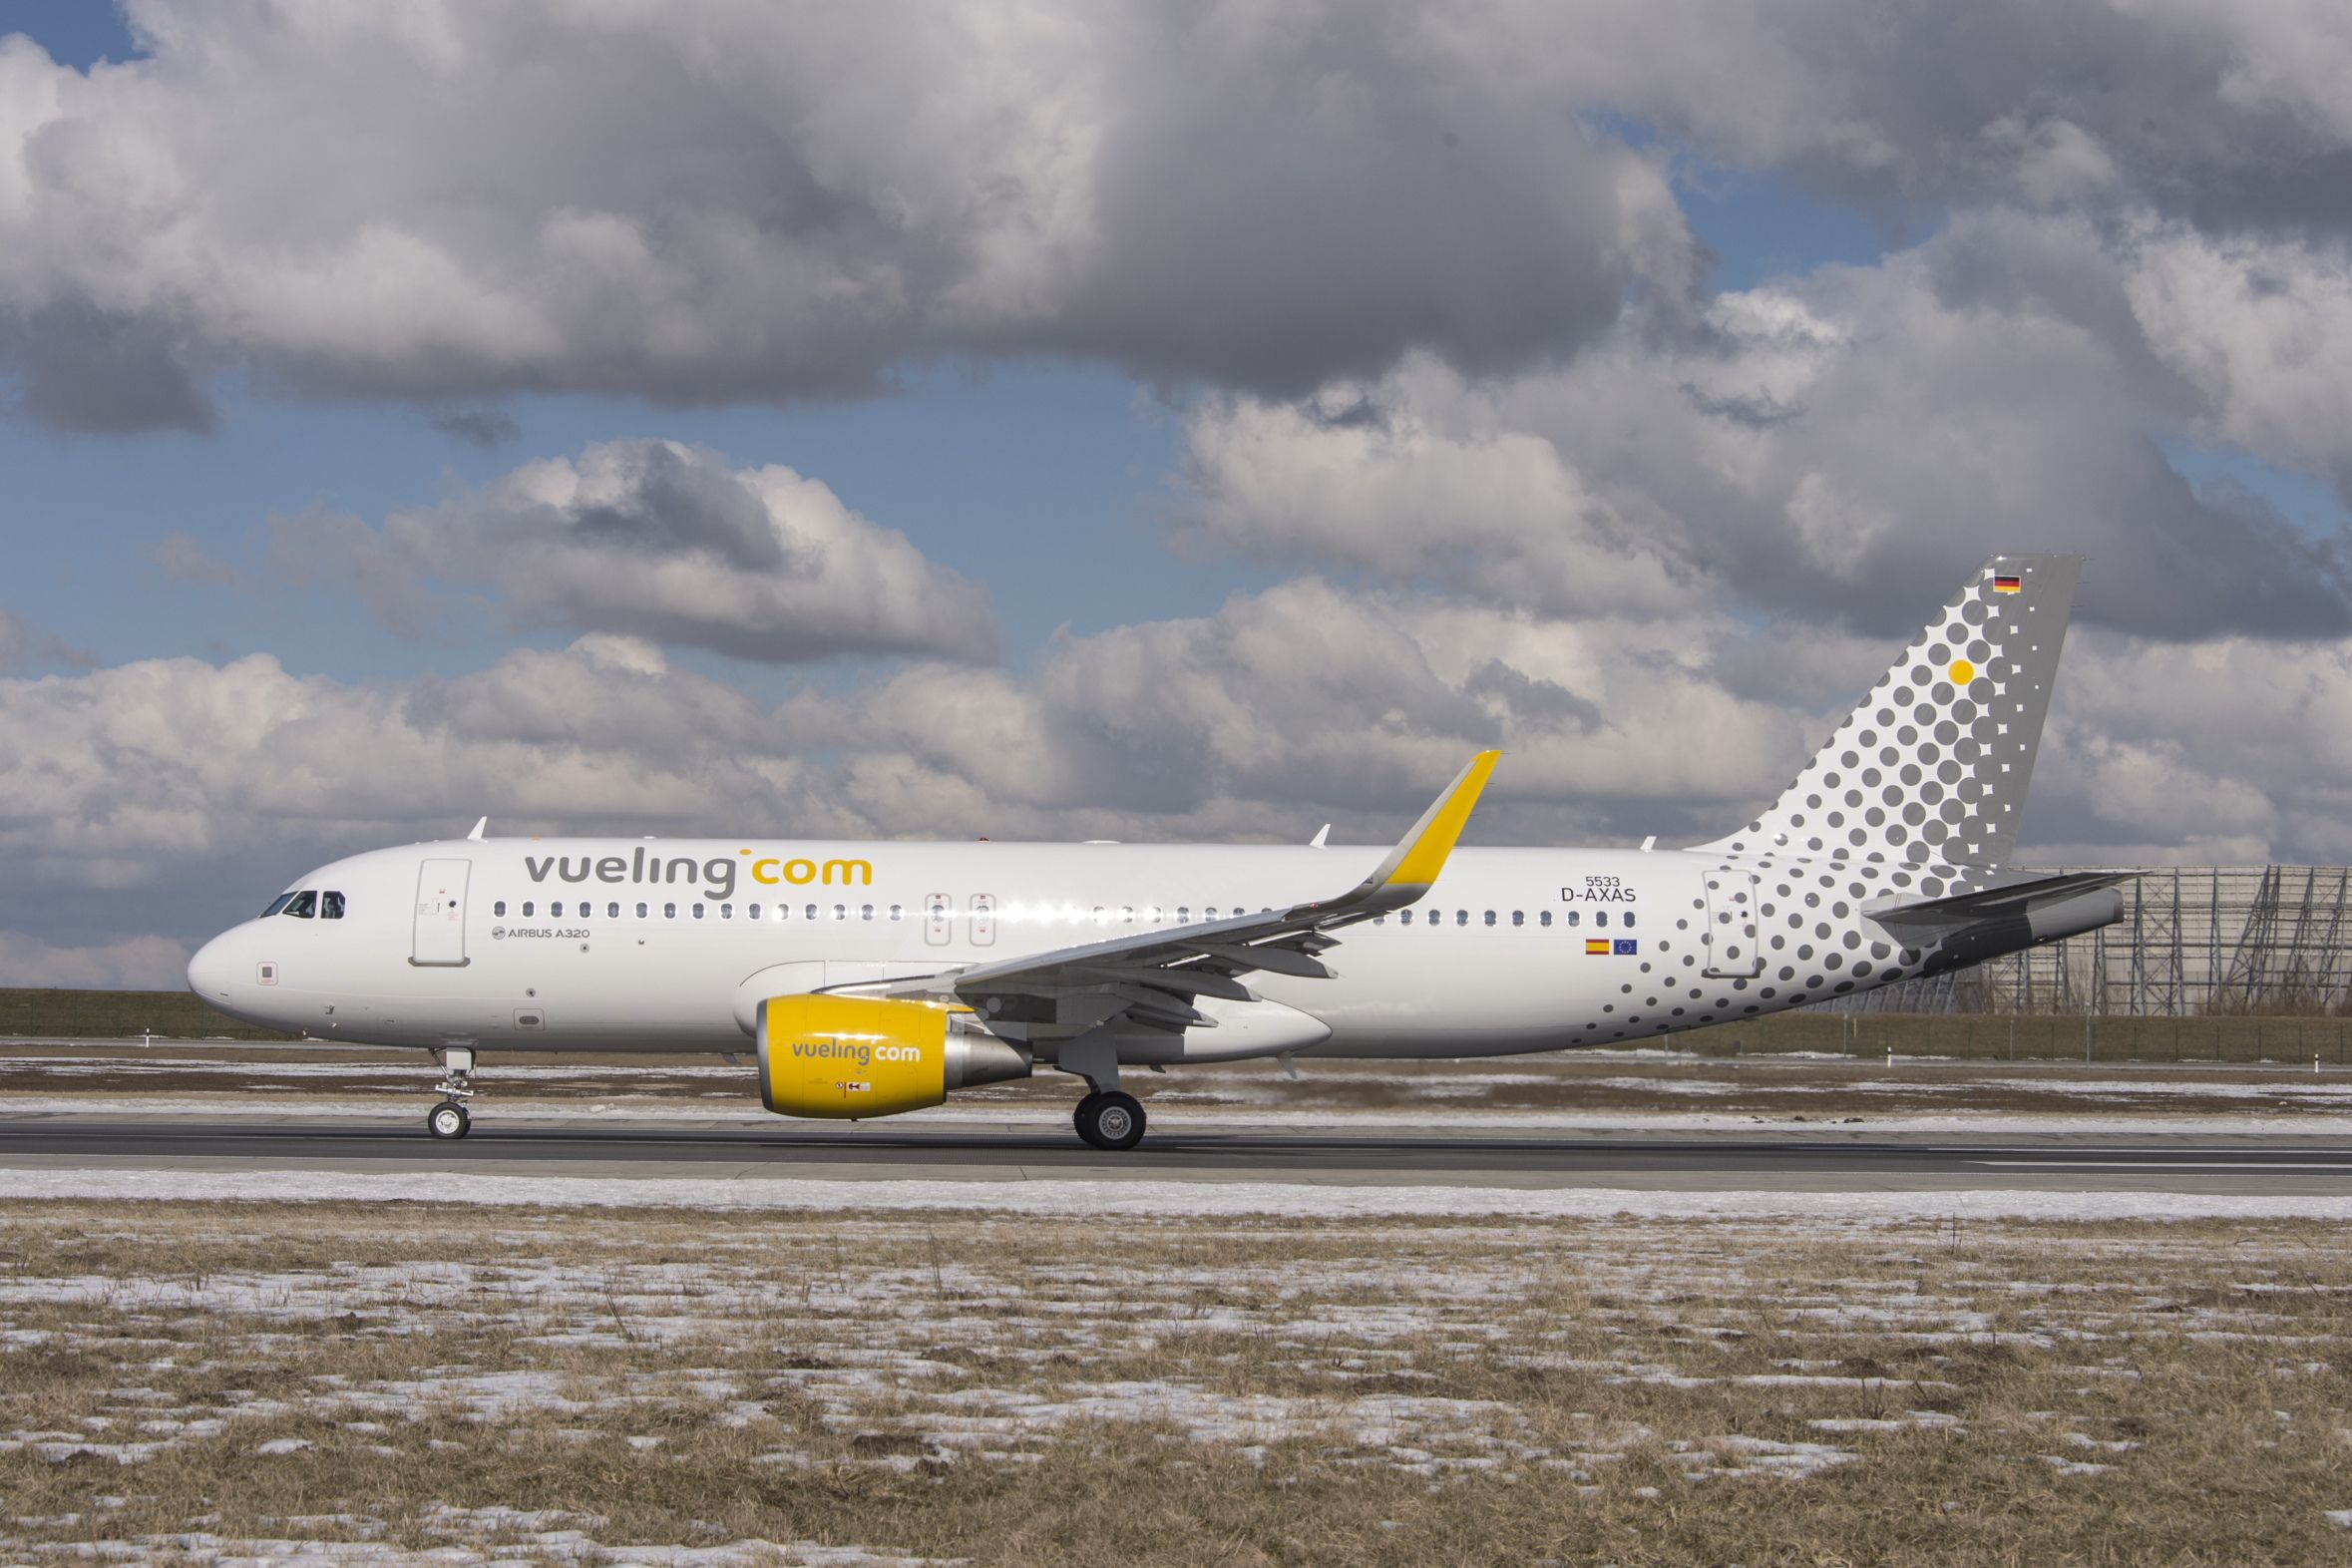 Airbus A320 of Vueling with sharklet